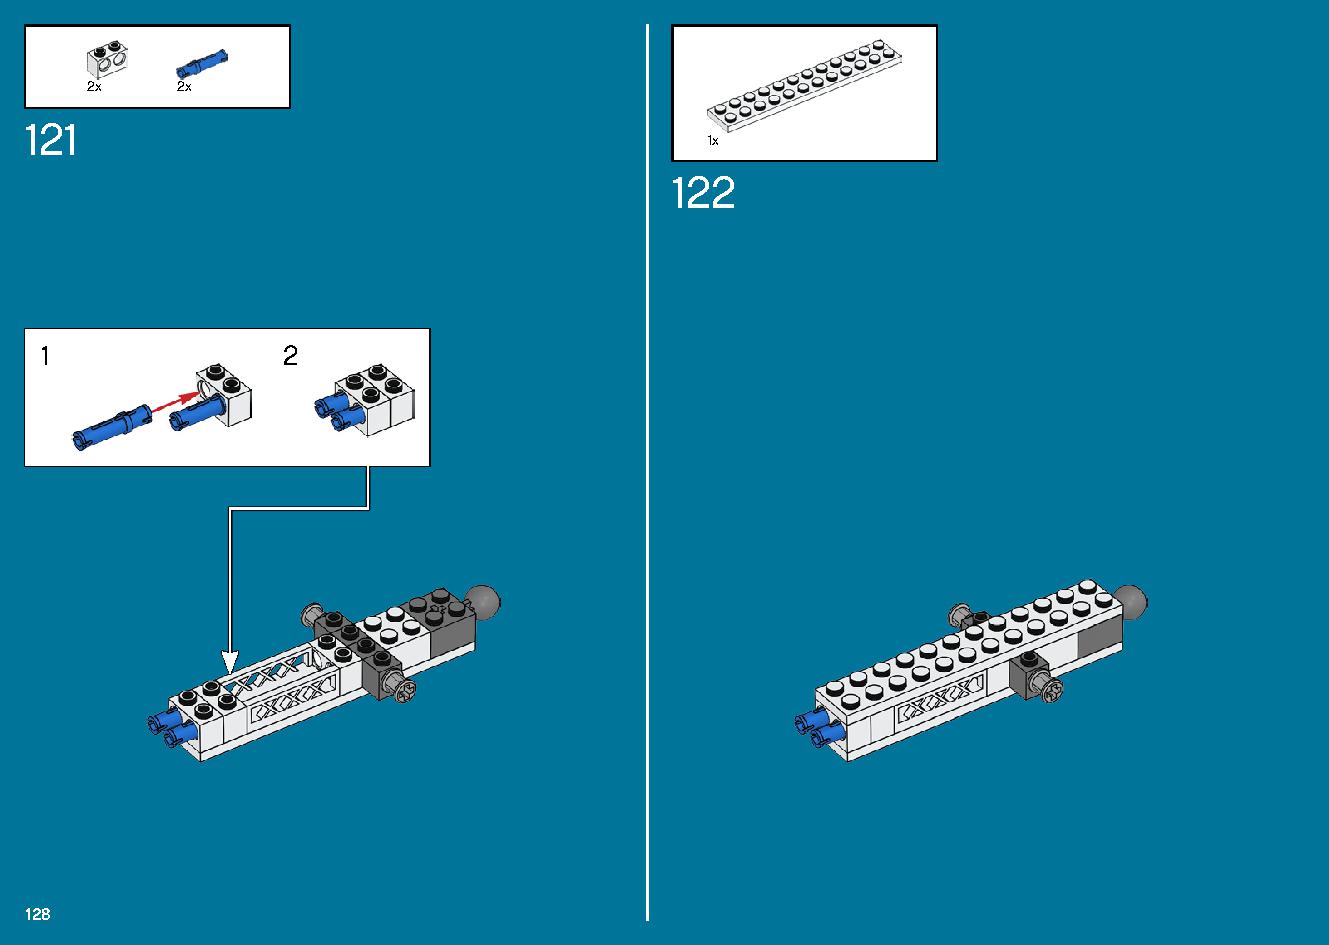 International Space Station 21321 LEGO information LEGO instructions 128 page